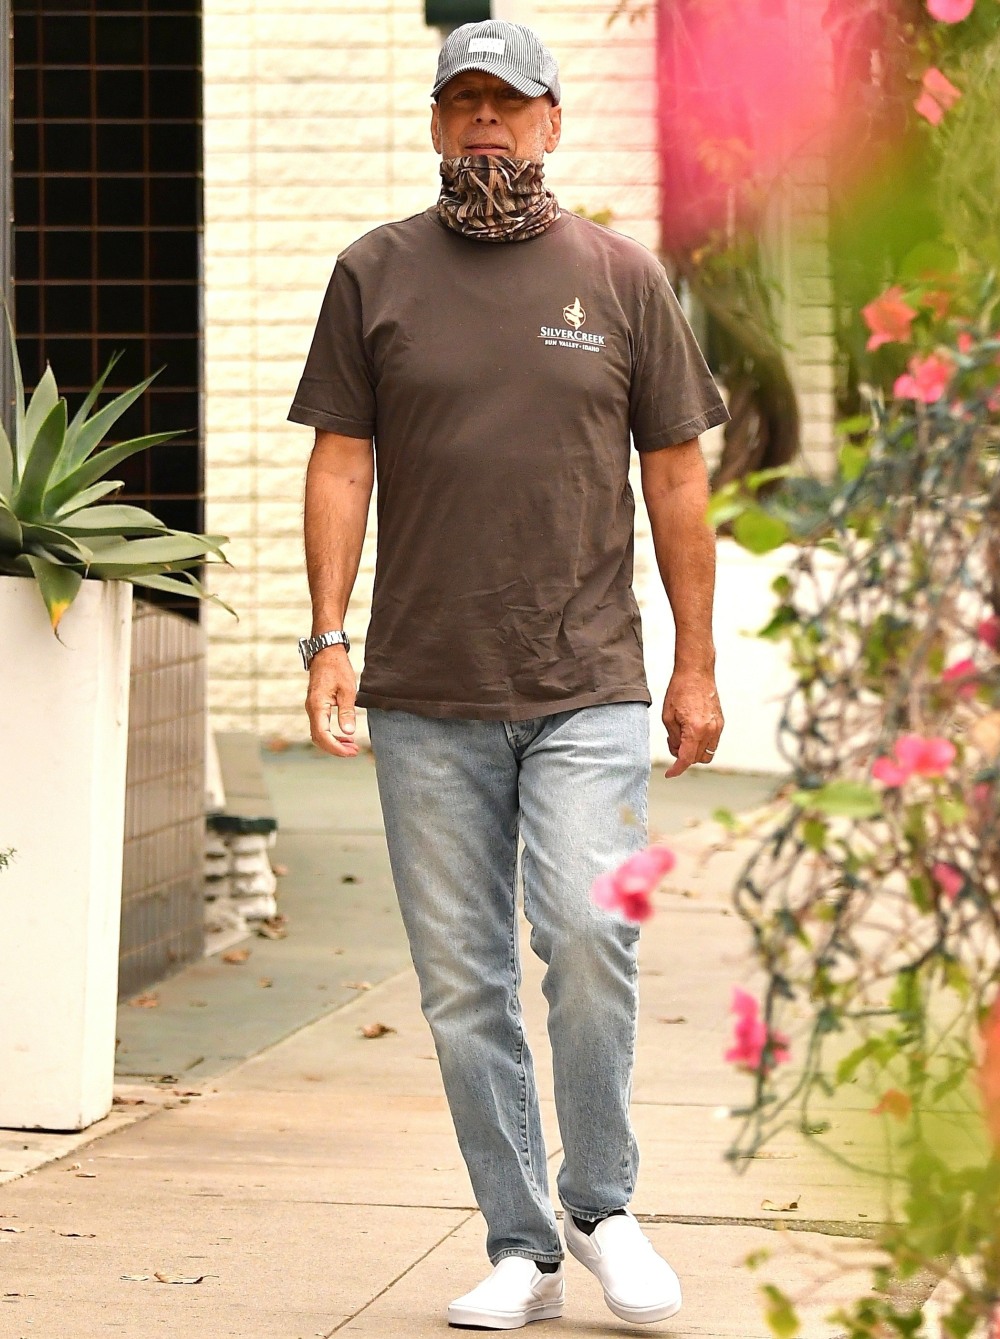 Bruce Willis goes for a Care Free Walk in the neighborhood